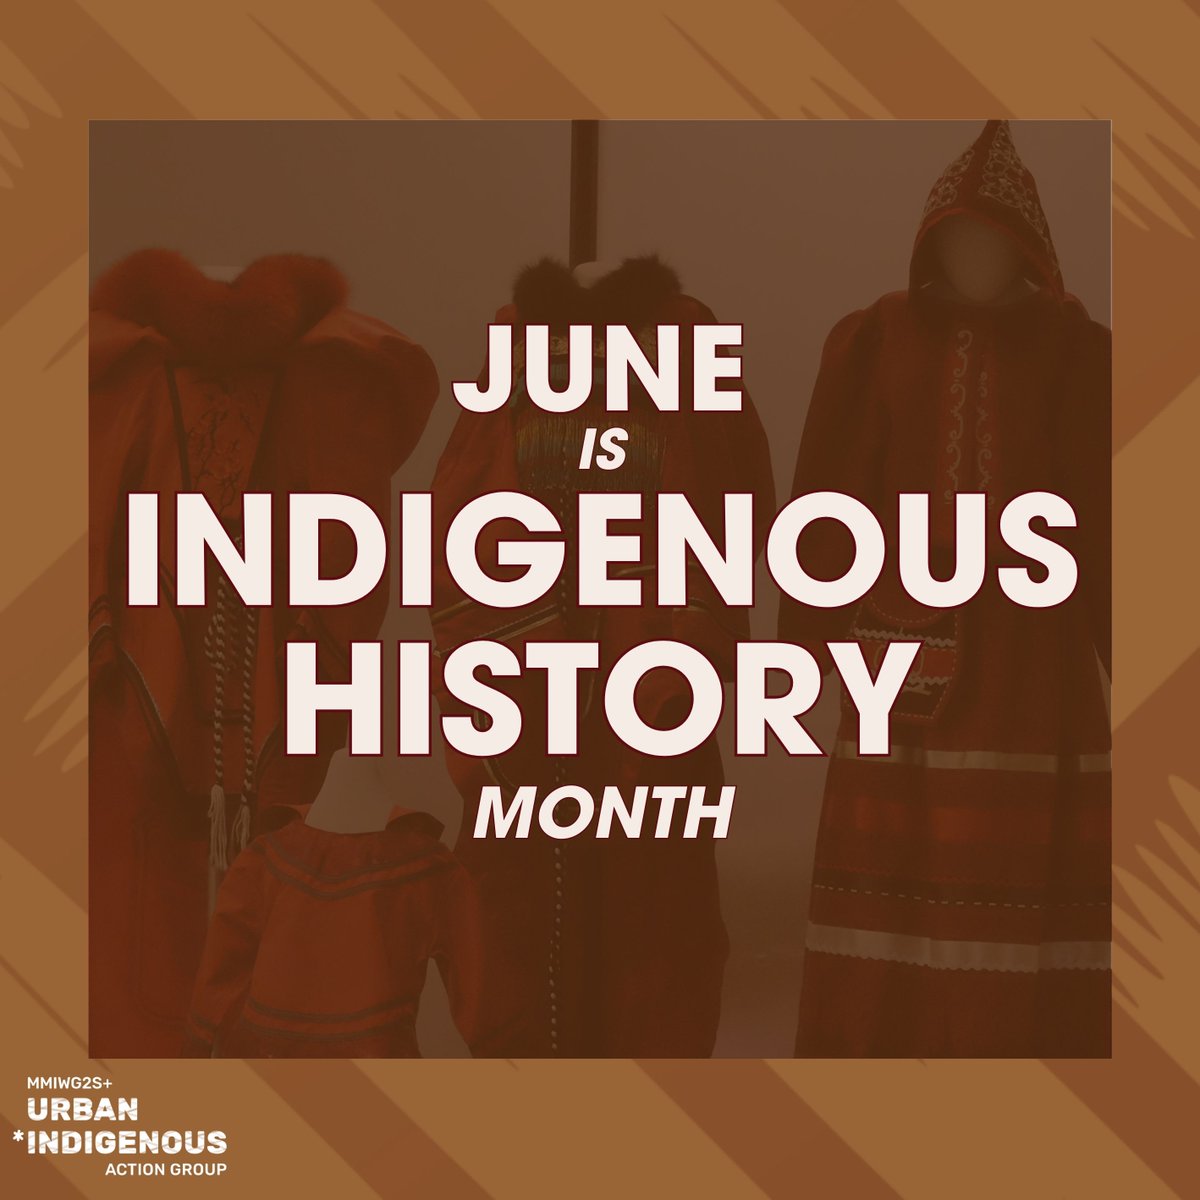 Indigenous peoples have been living on this land since time immemorial and our presence continues to impact the evolution of the country, take time this month to honour yourself and the gifts you share in the world as an Indigenous person!

#IndigenousHistoryMonth #MMIWG2SAction